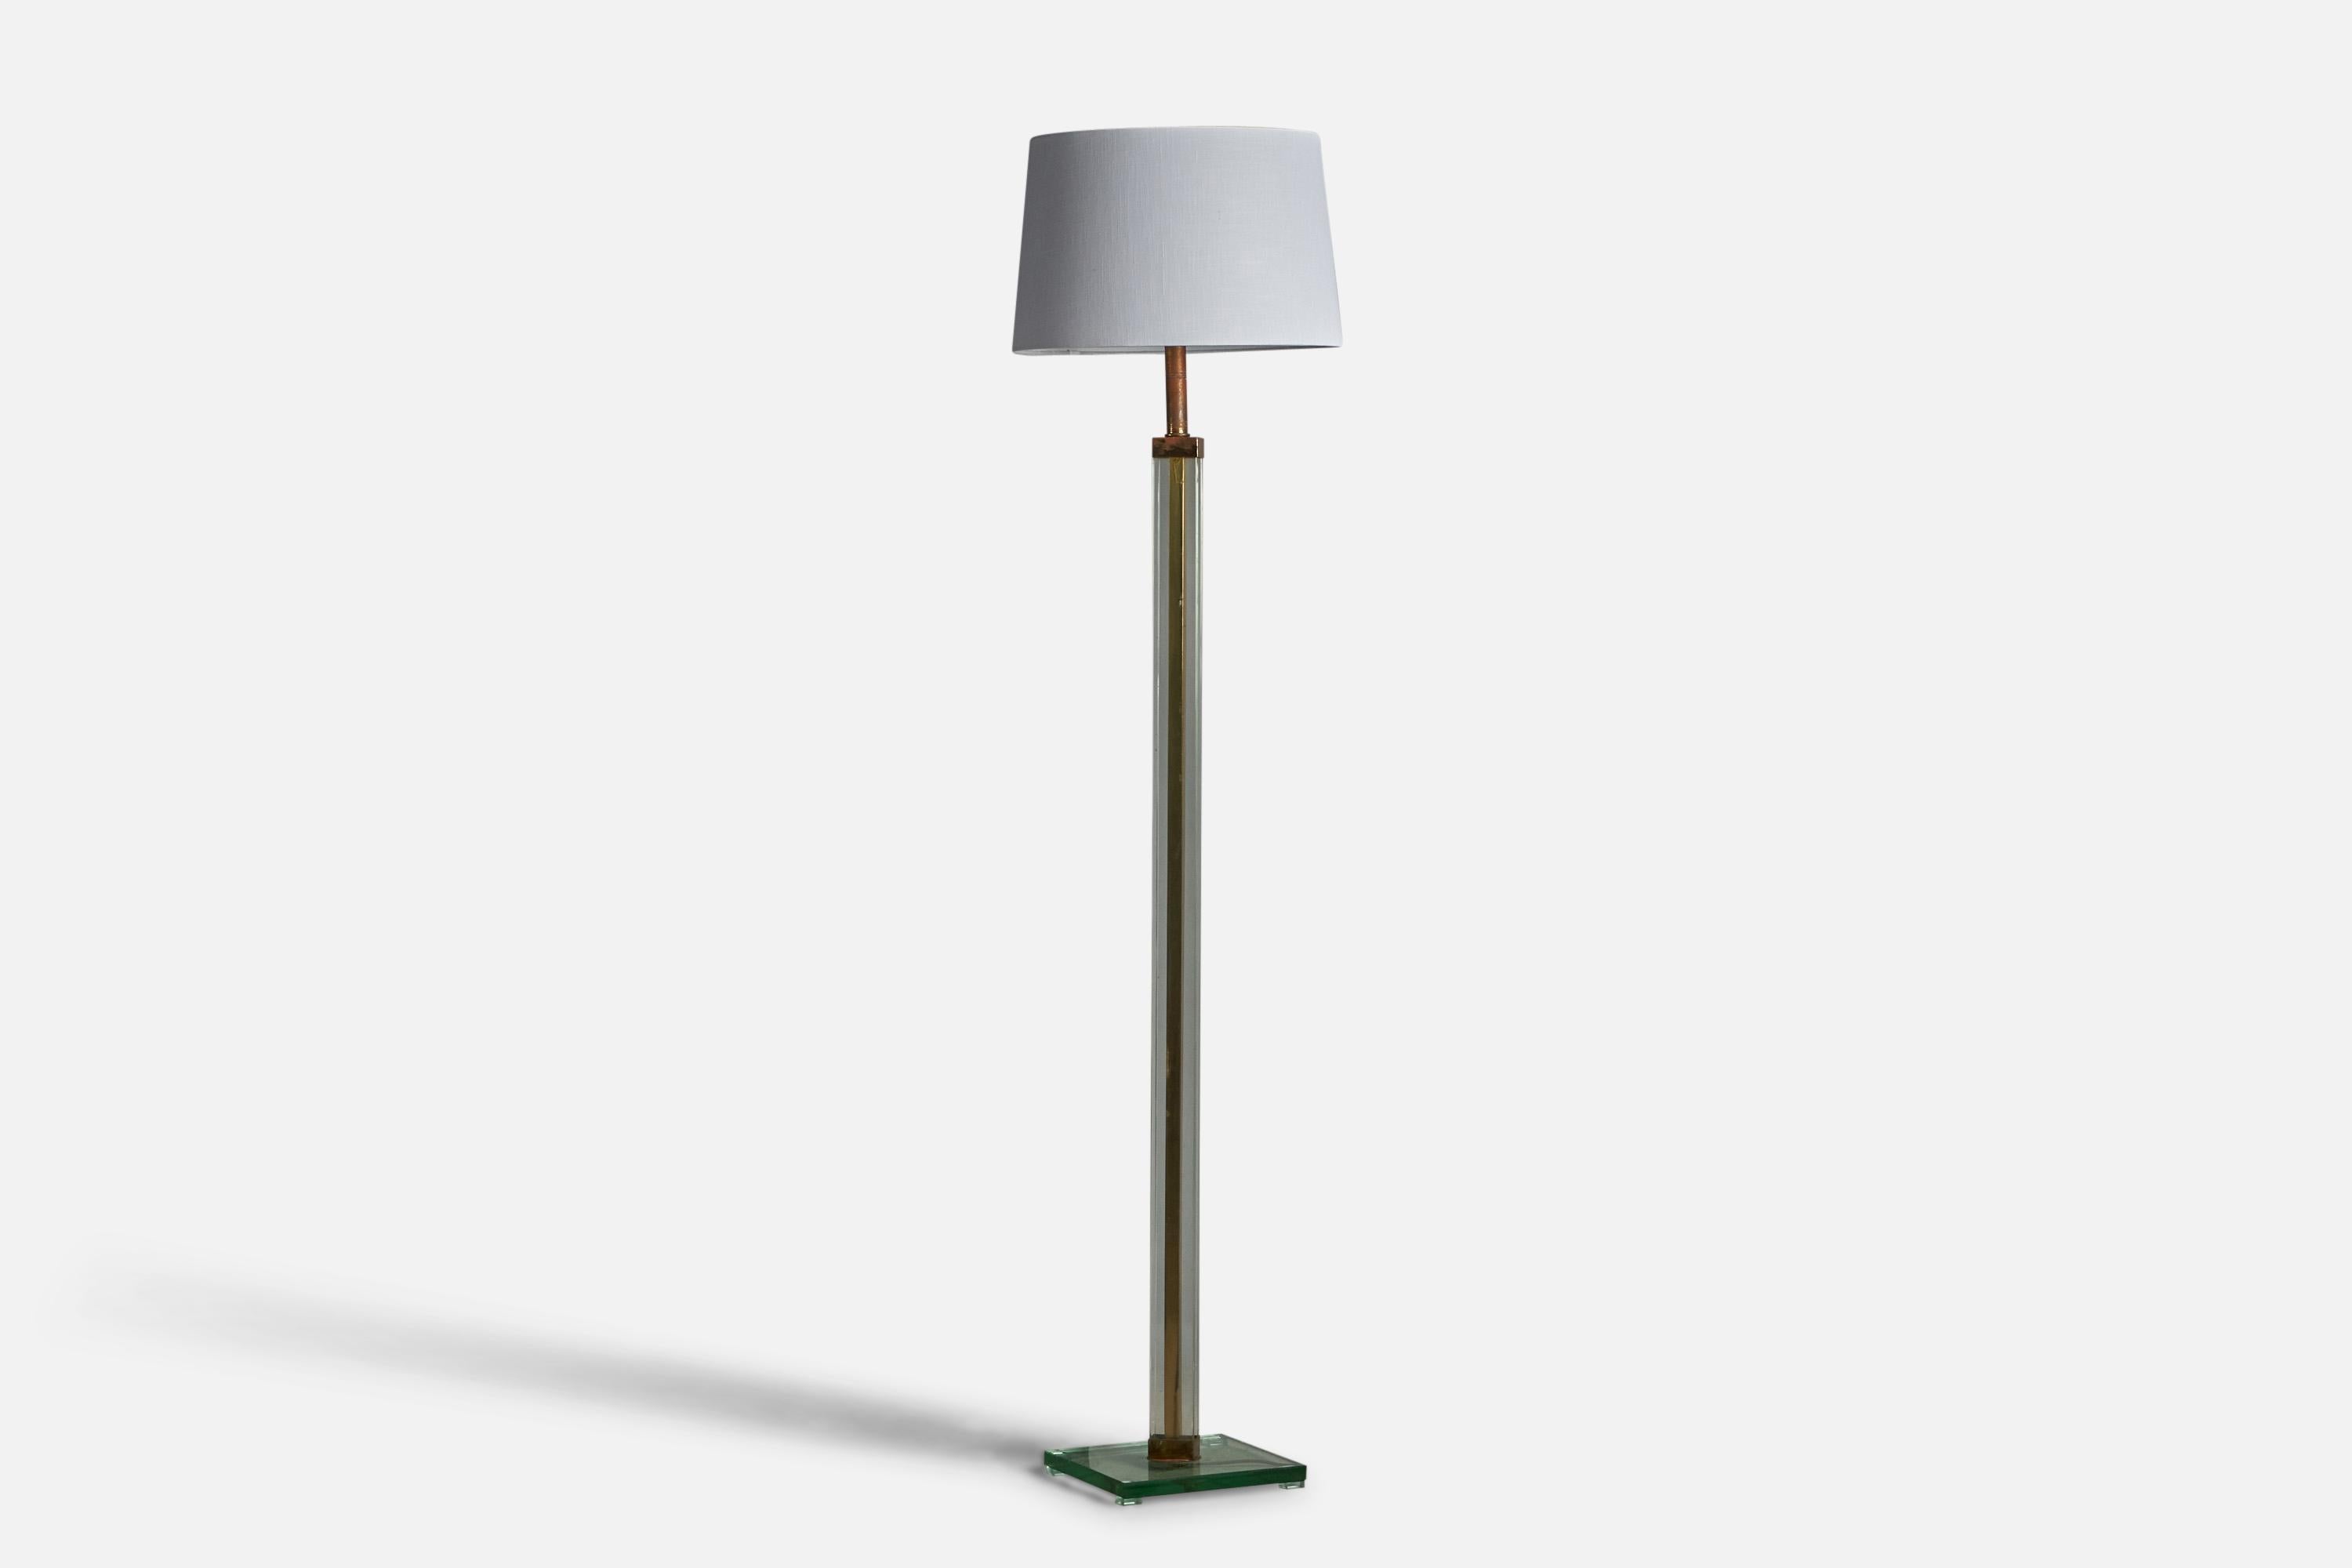 A brass, glass and fabric floor lamp designed by Pietro Chiesa and produced by Fontana Arte, Italy, 1940s.

Dimensions of Lamp (inches): 69.5” H x 10.5” W x 10.25” D
Dimensions of Shade (inches): 15” Top Diameter x 17” Bottom Diameter x 10.75”